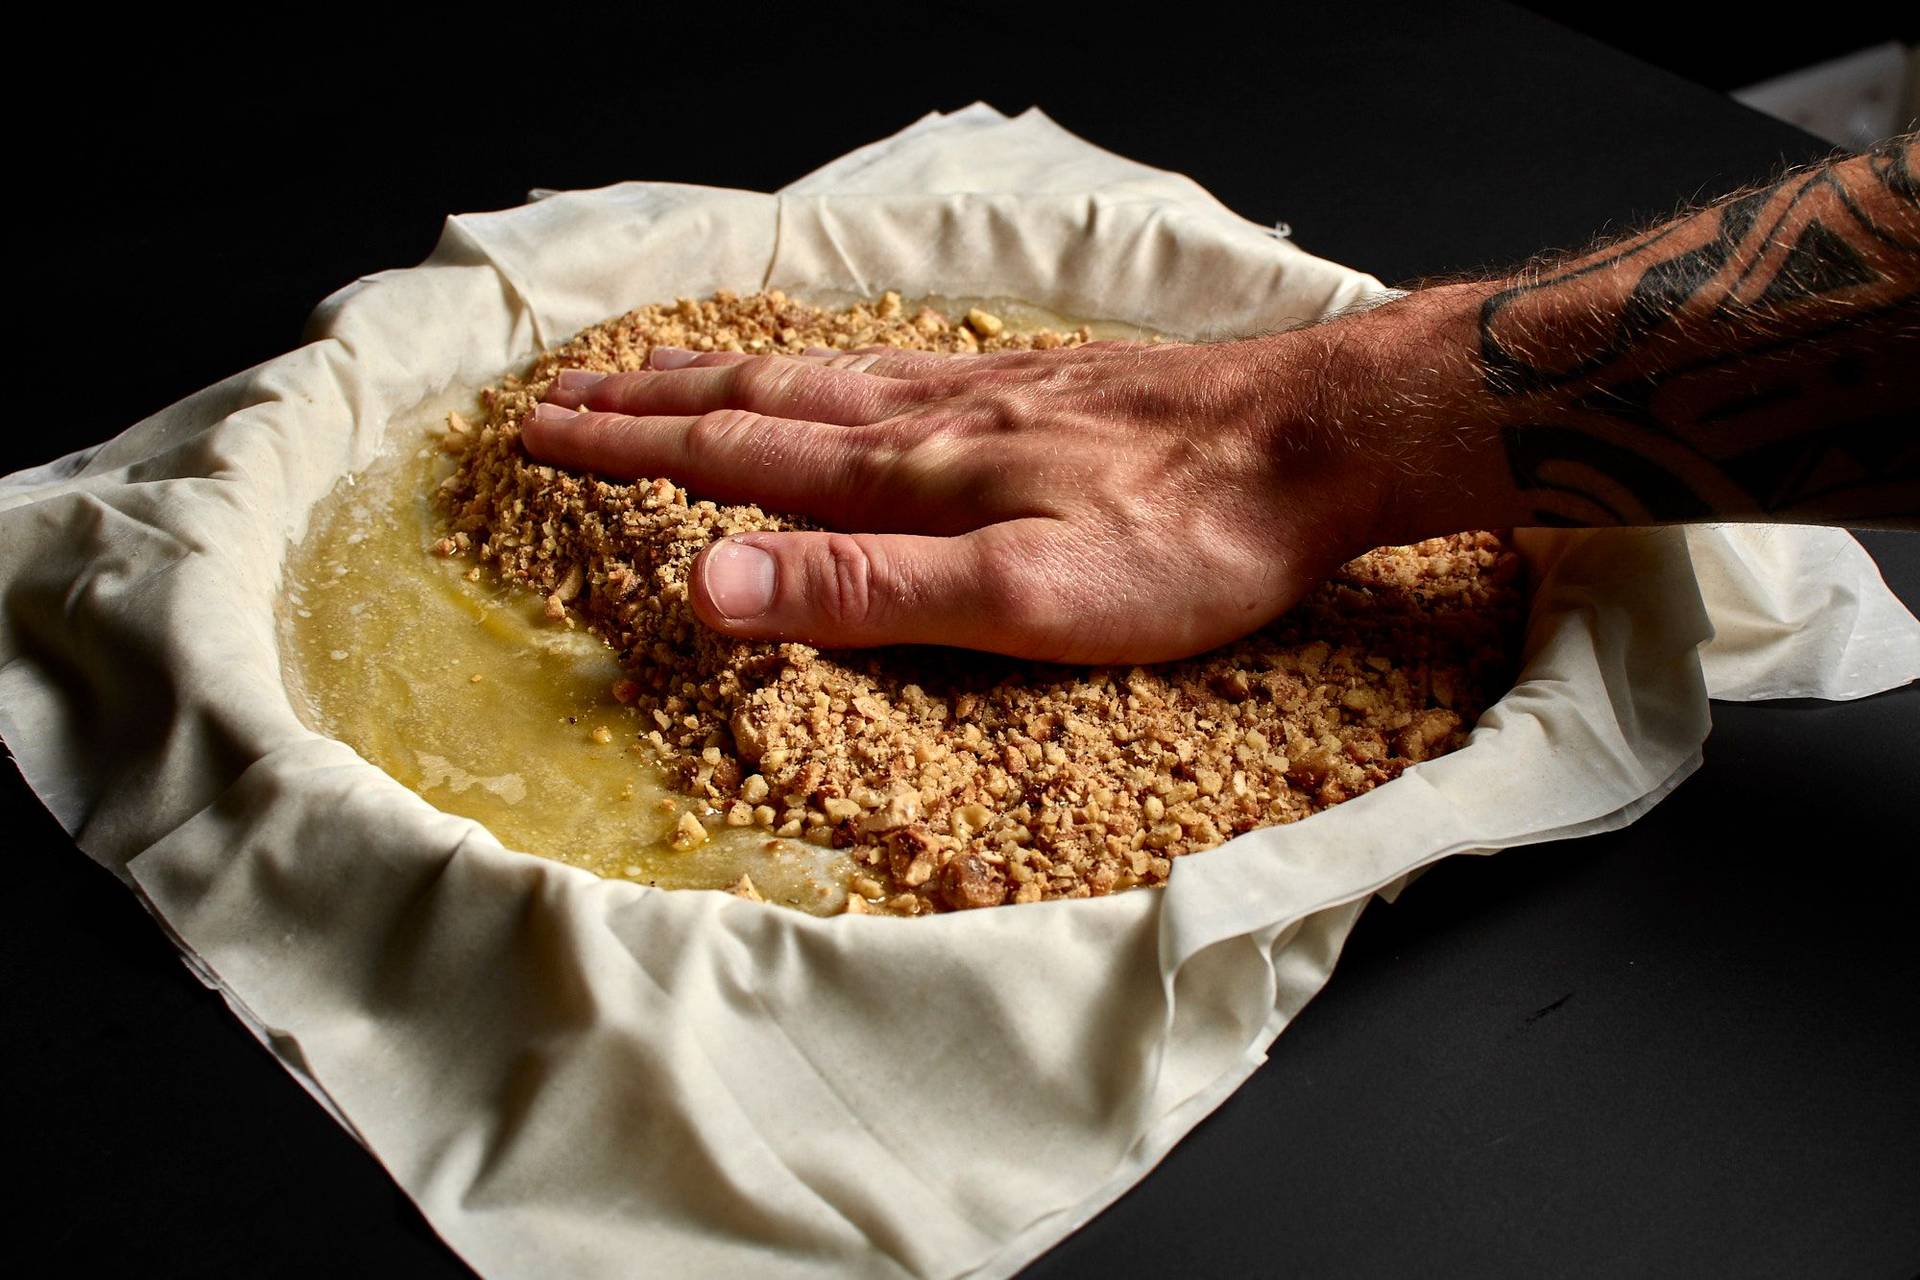 making baklava with hazelnuts and walnuts in a baking pan with black background